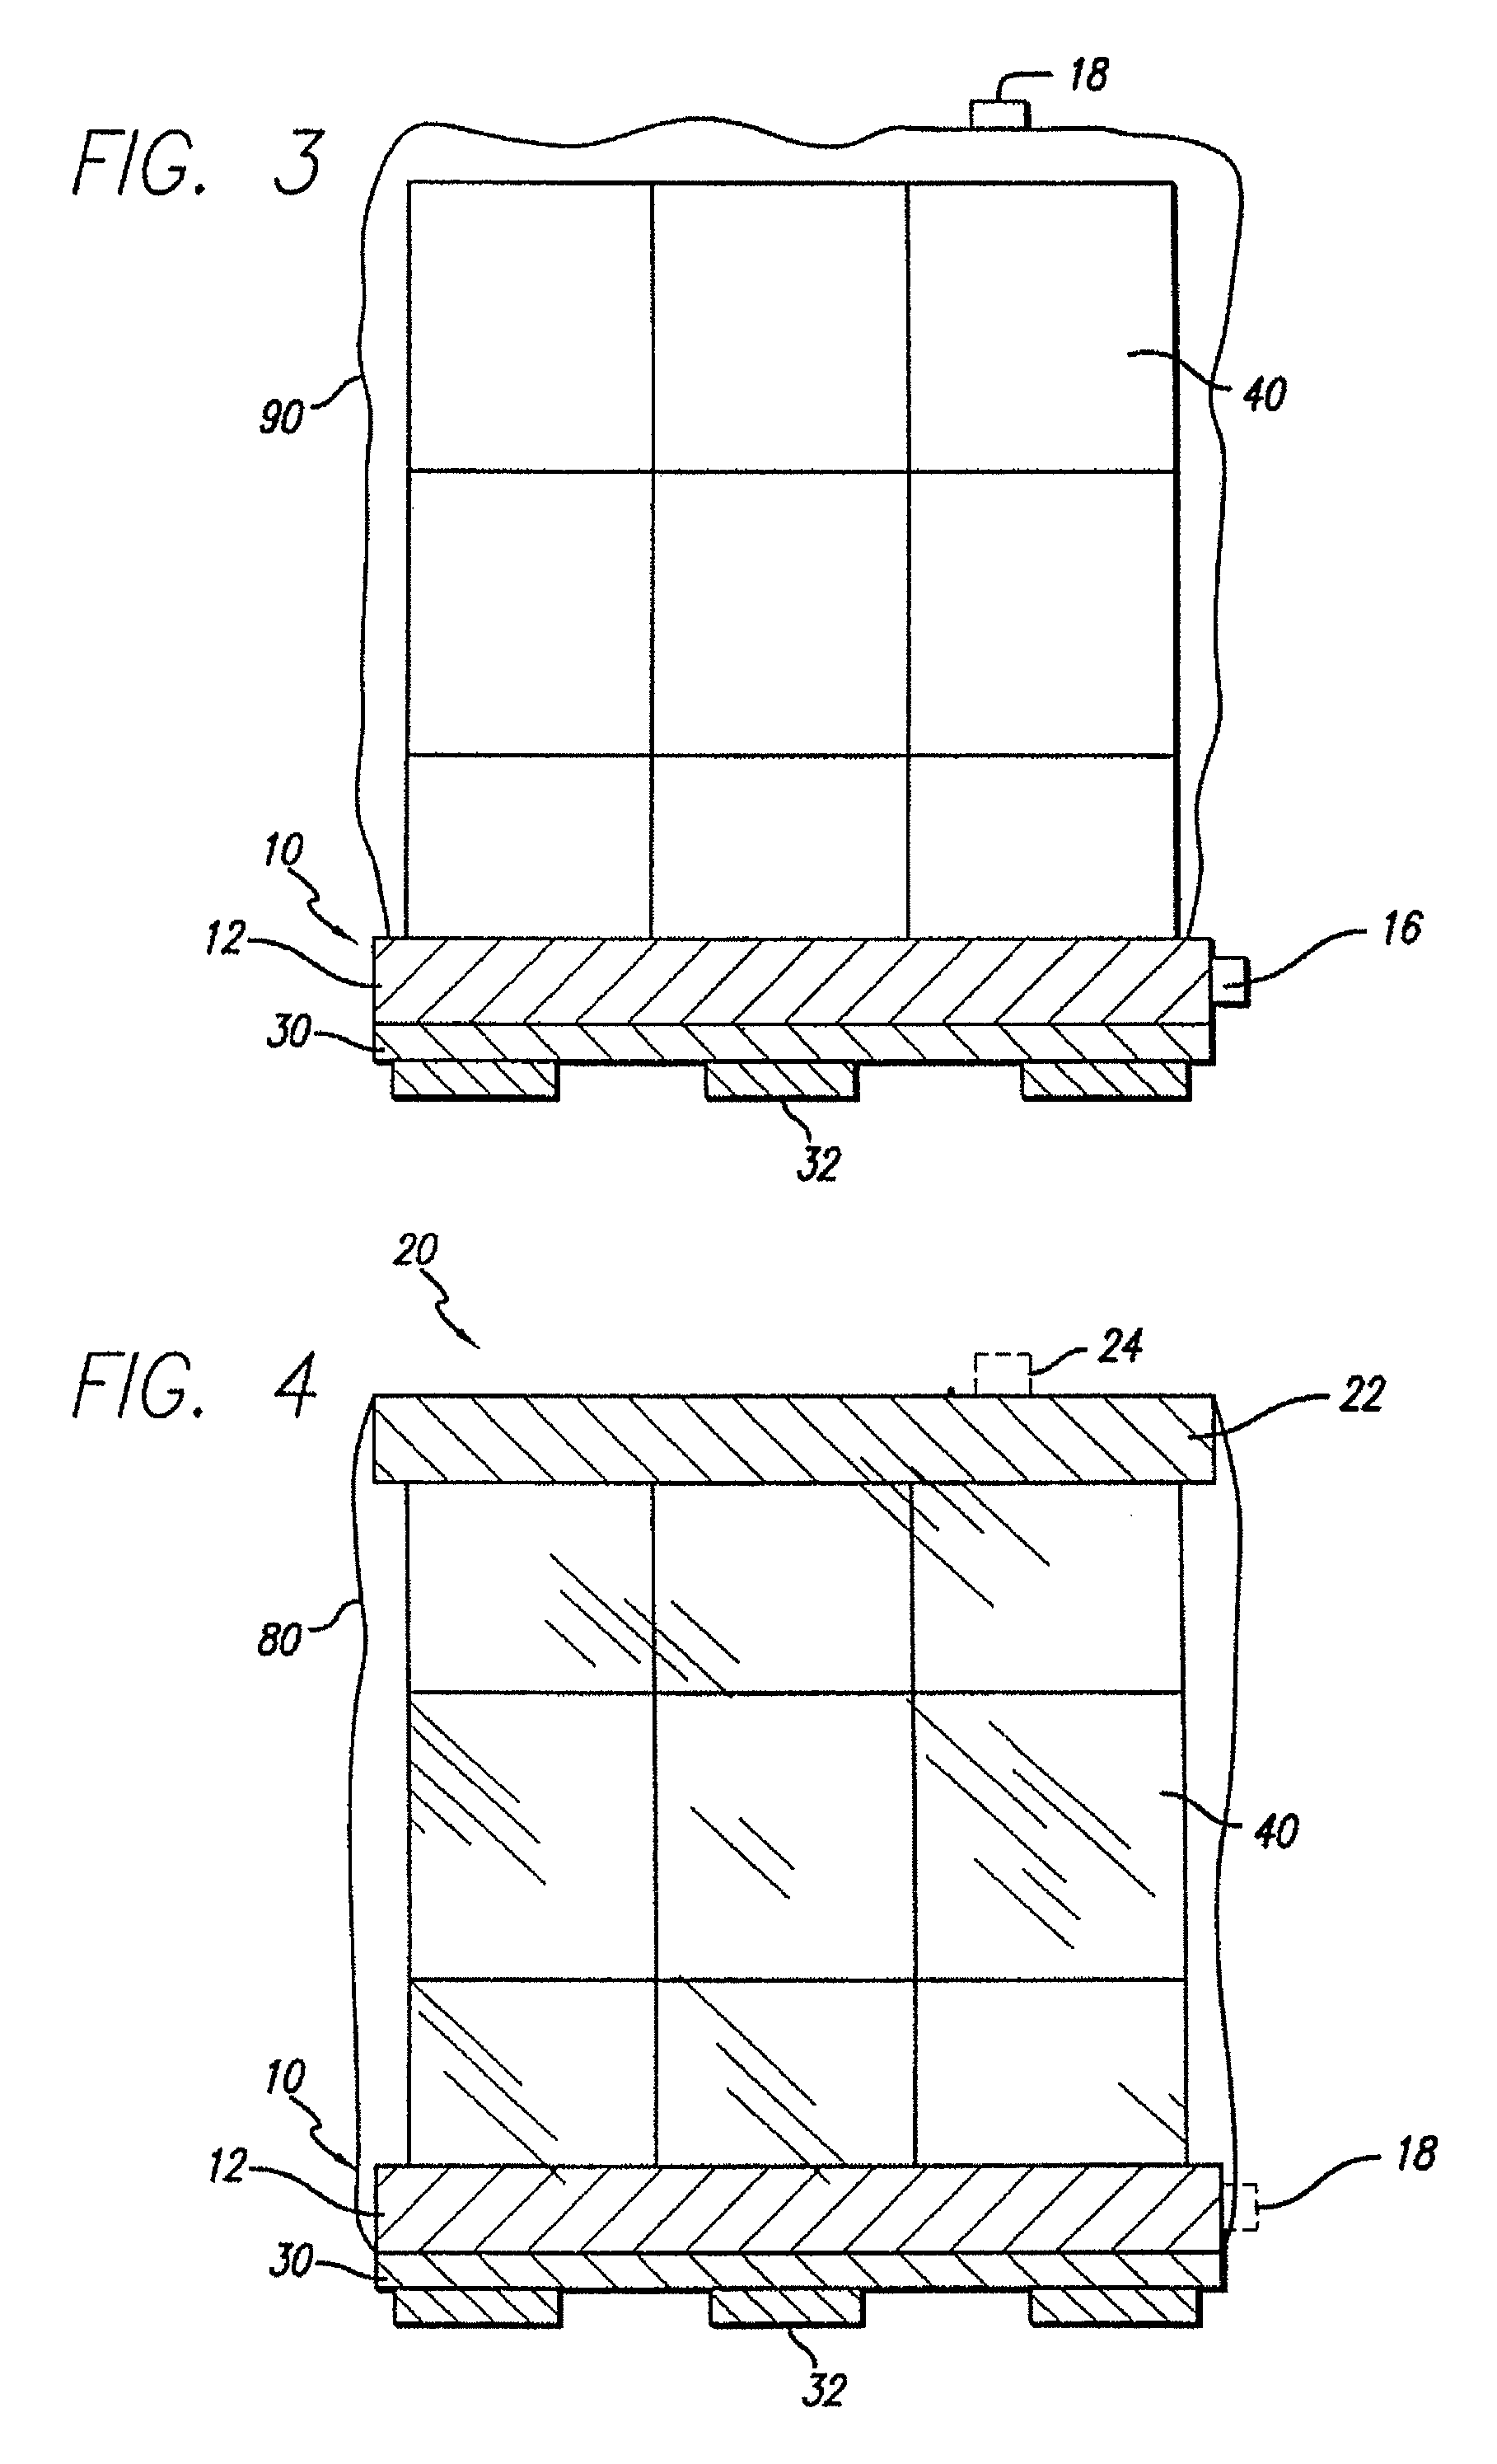 Method for providing a regulated atmosphere for packaging perishable goods